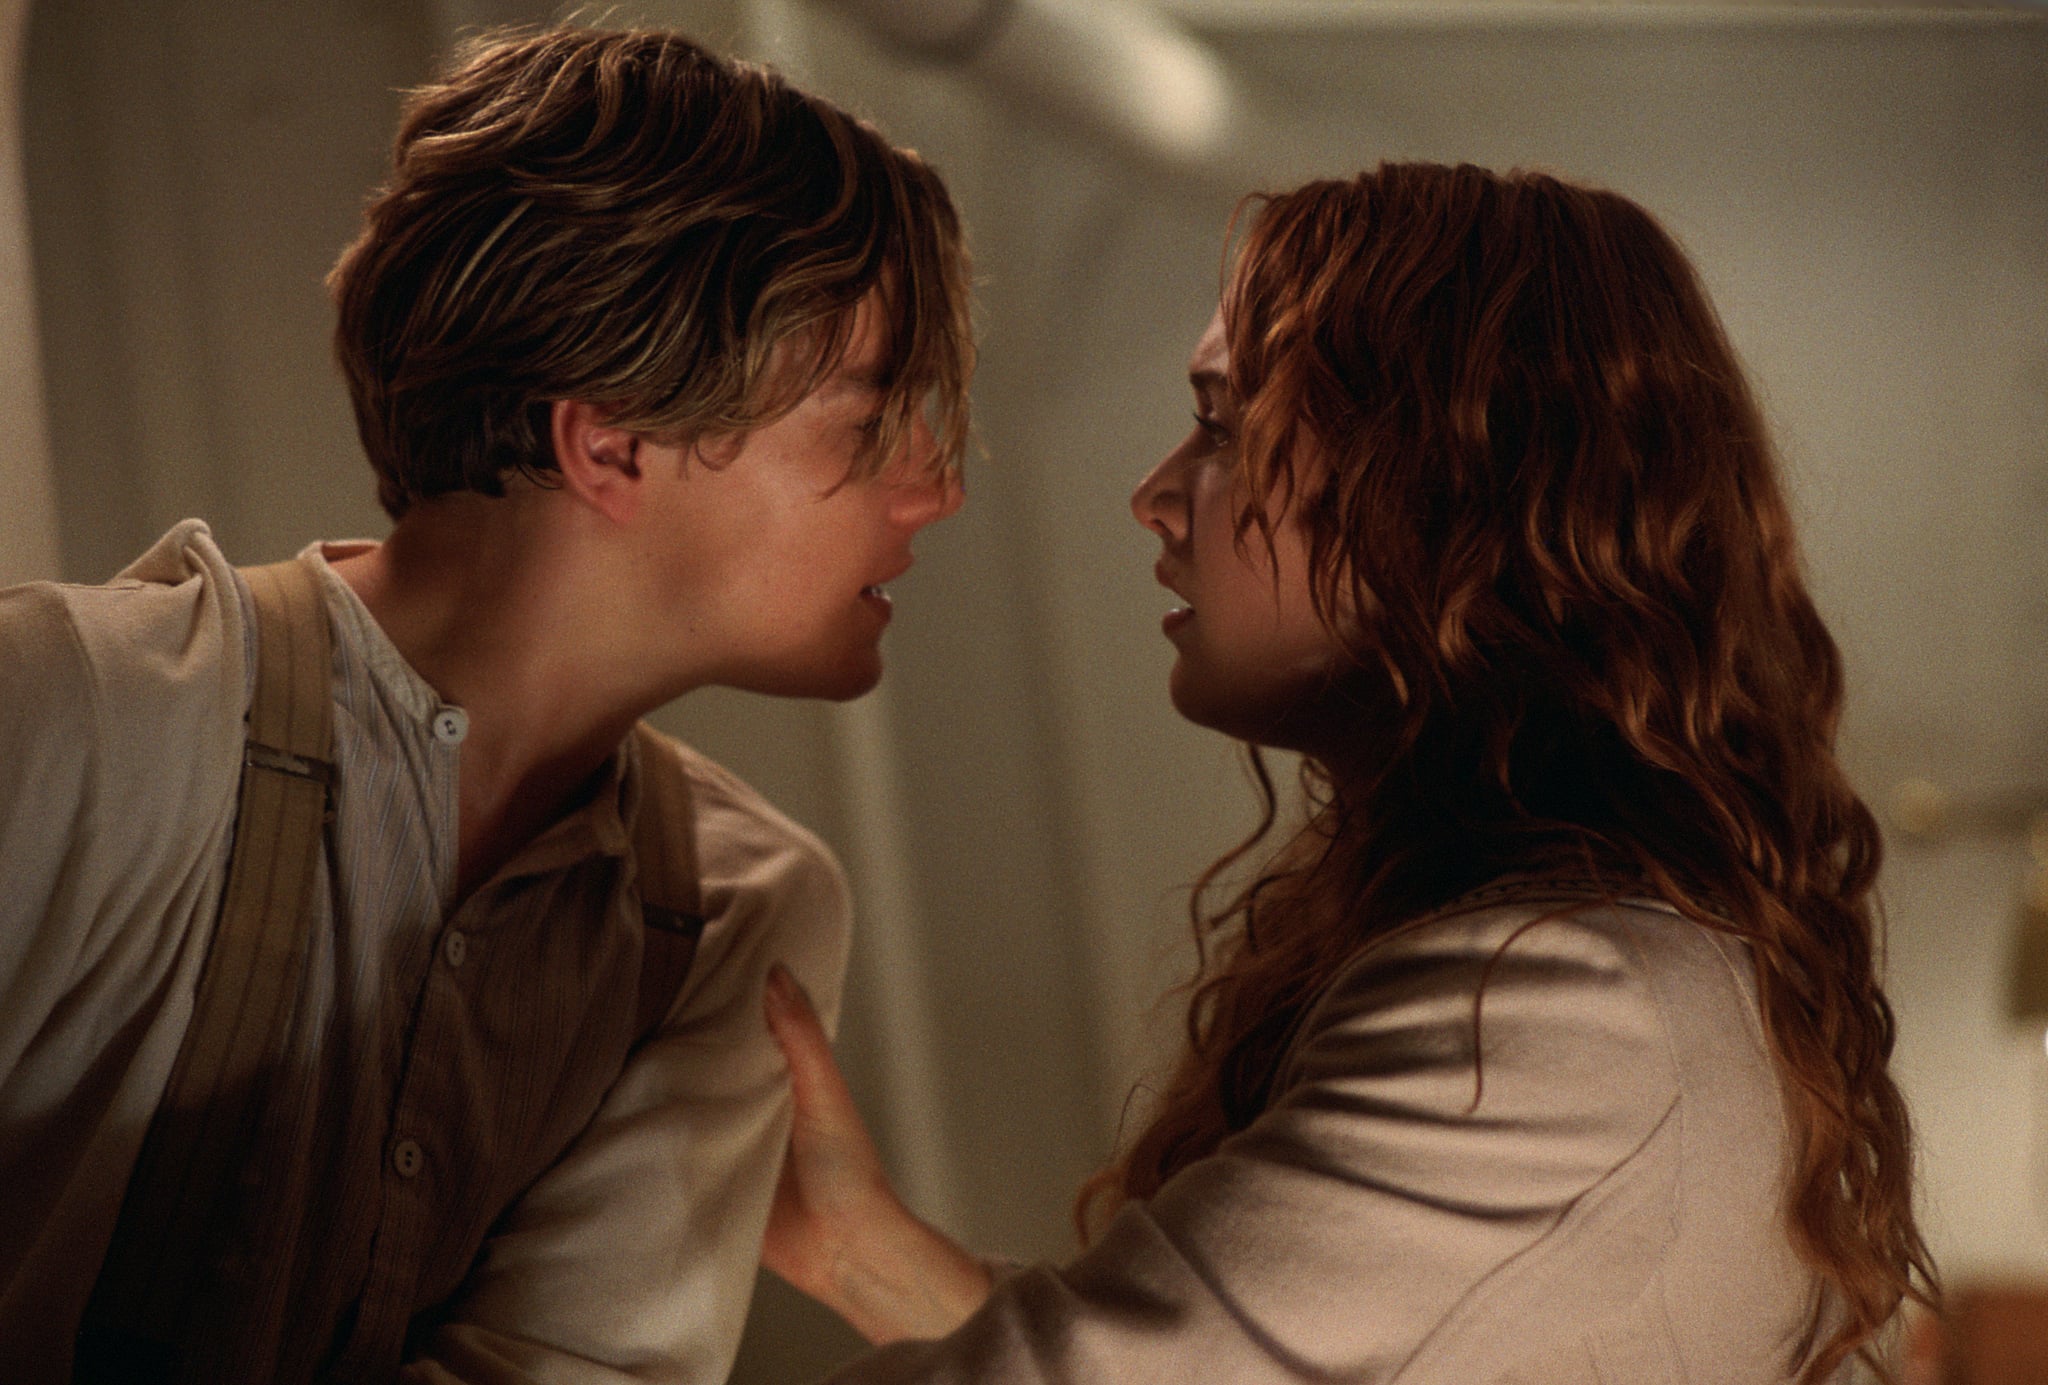 Leonardo Dicaprio And Kate Winslet In Titanic Swoon Over These Original Titanic Pictures 